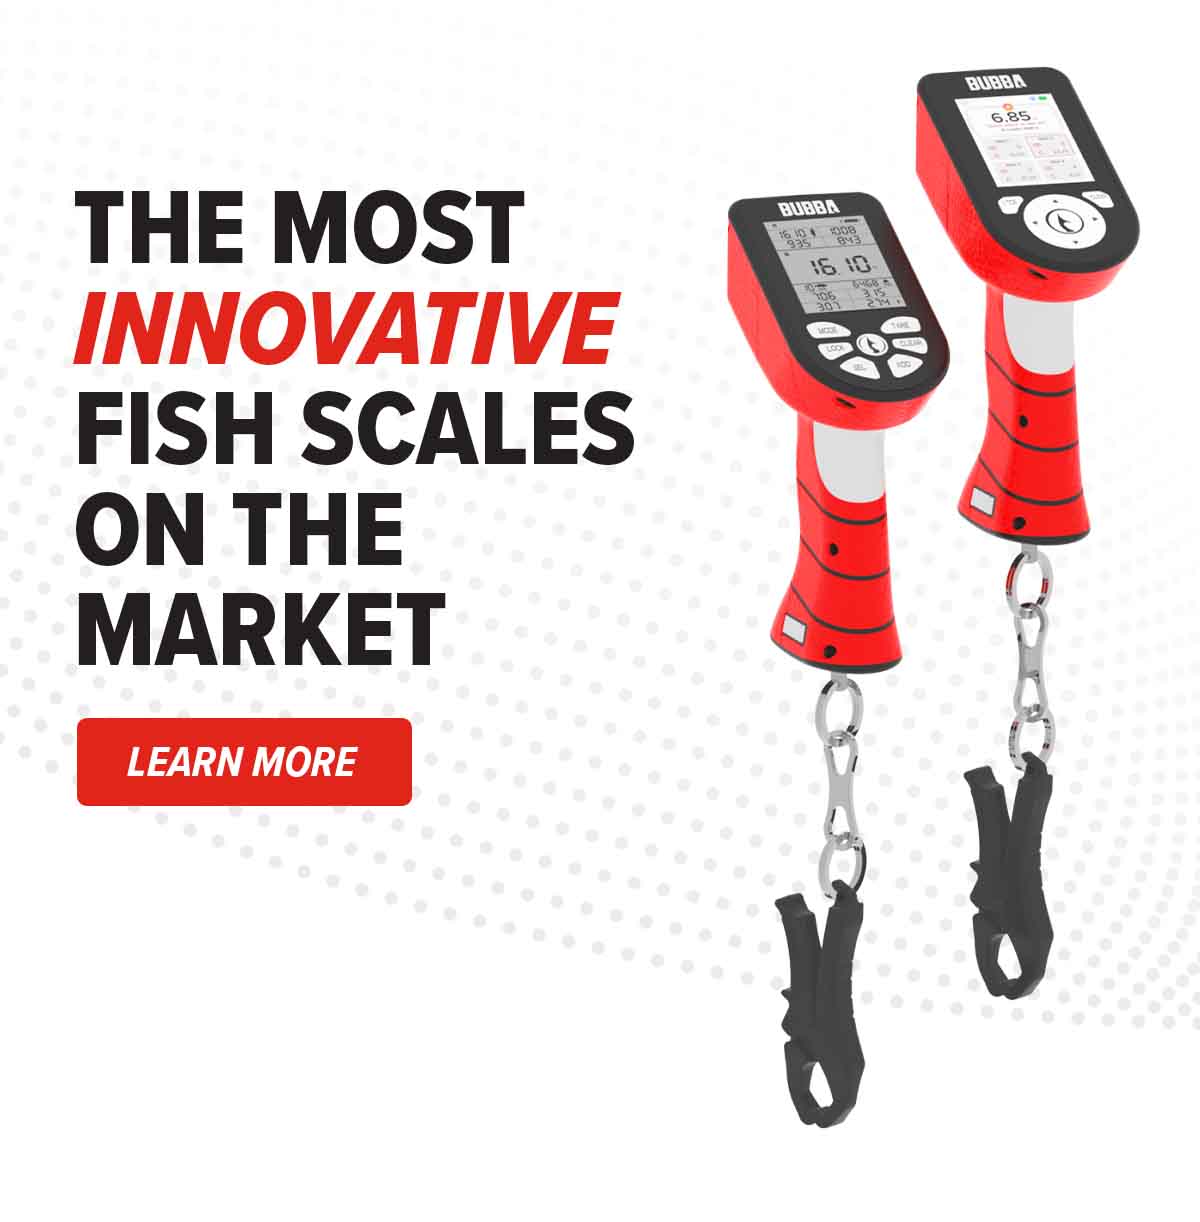 Learn More About The Most Innovative Fish Scales On The Market